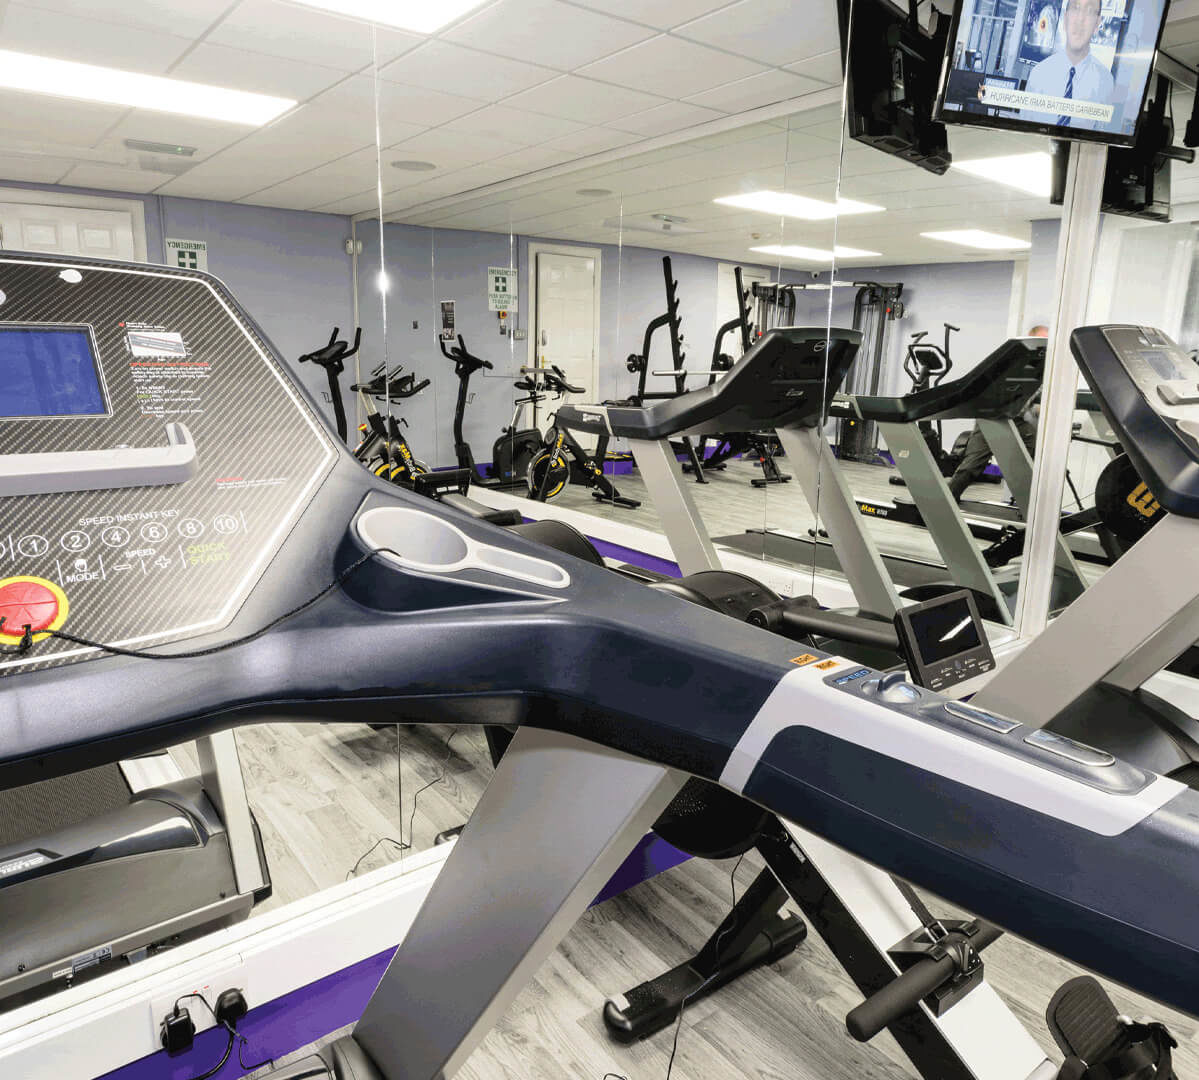 Pitlochry Hotels with Gym | Perthshire | Atholl Palace Hotel